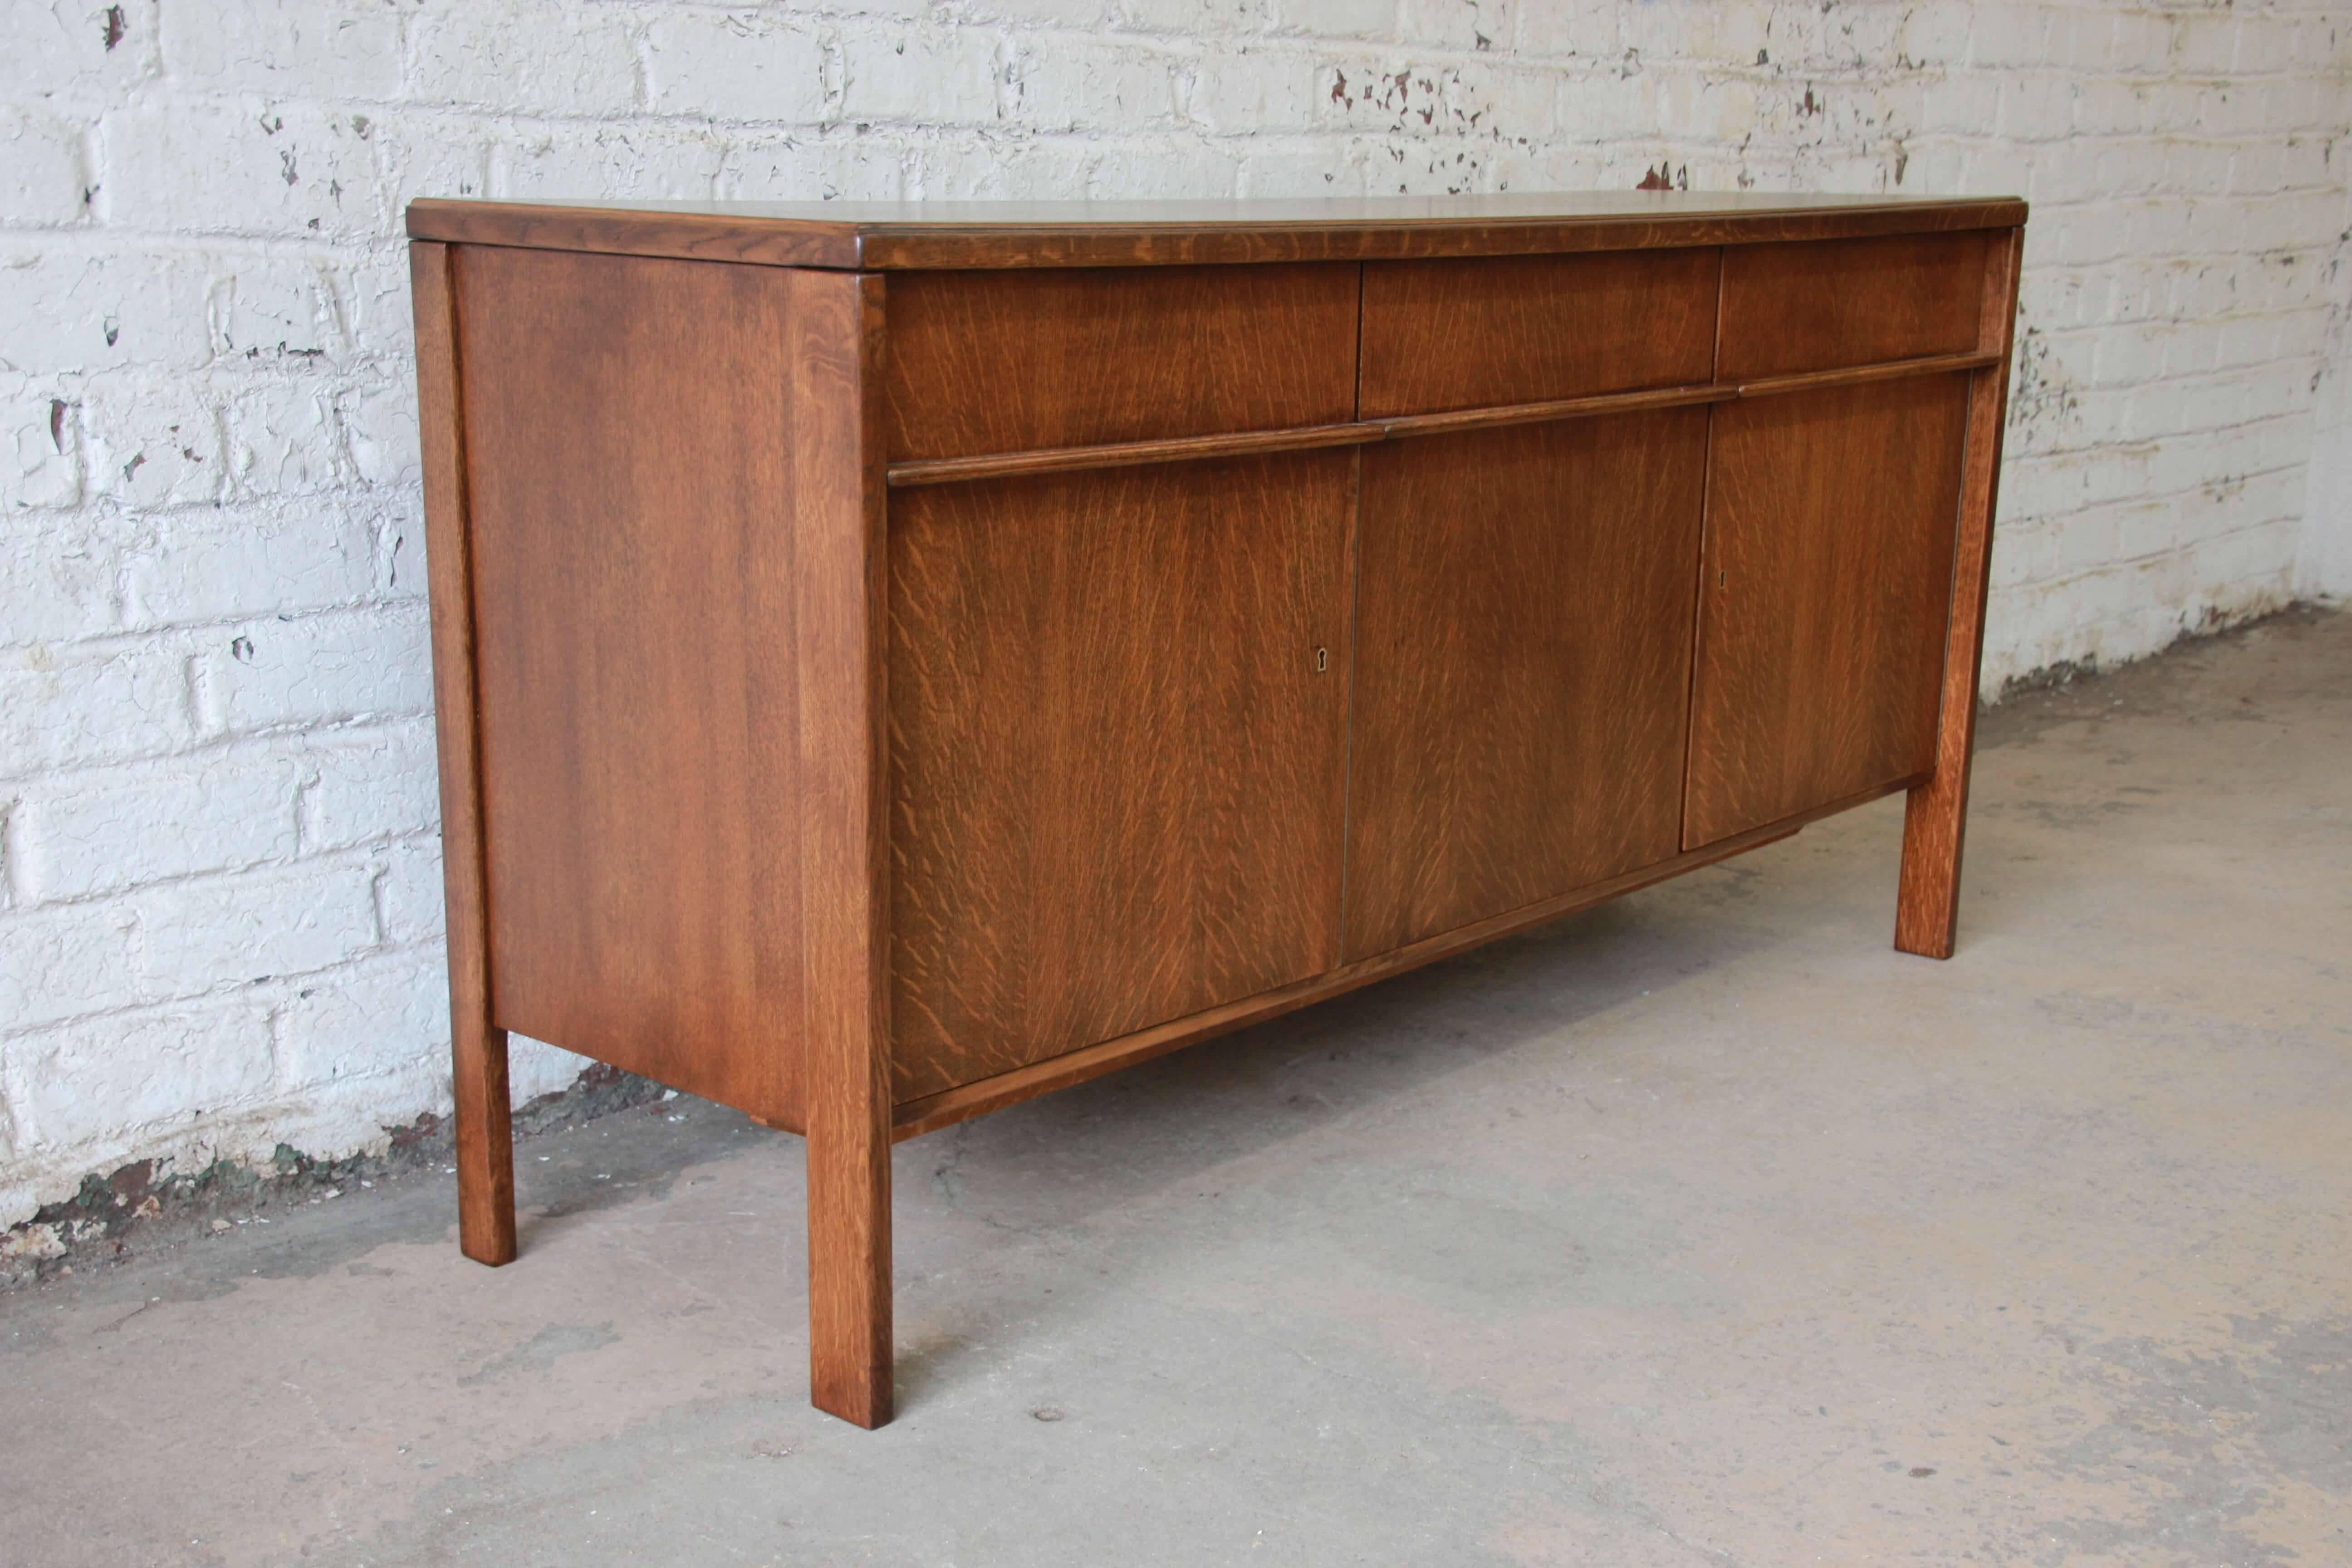 Offering a rare beautifully restored Scandinavian Modern quarter sawn oak sideboard credenza by Cees Braakman for Pastoe. This piece has three uniquely designed drawers at the top and directly below are three cabinet doors. The left cabinet door